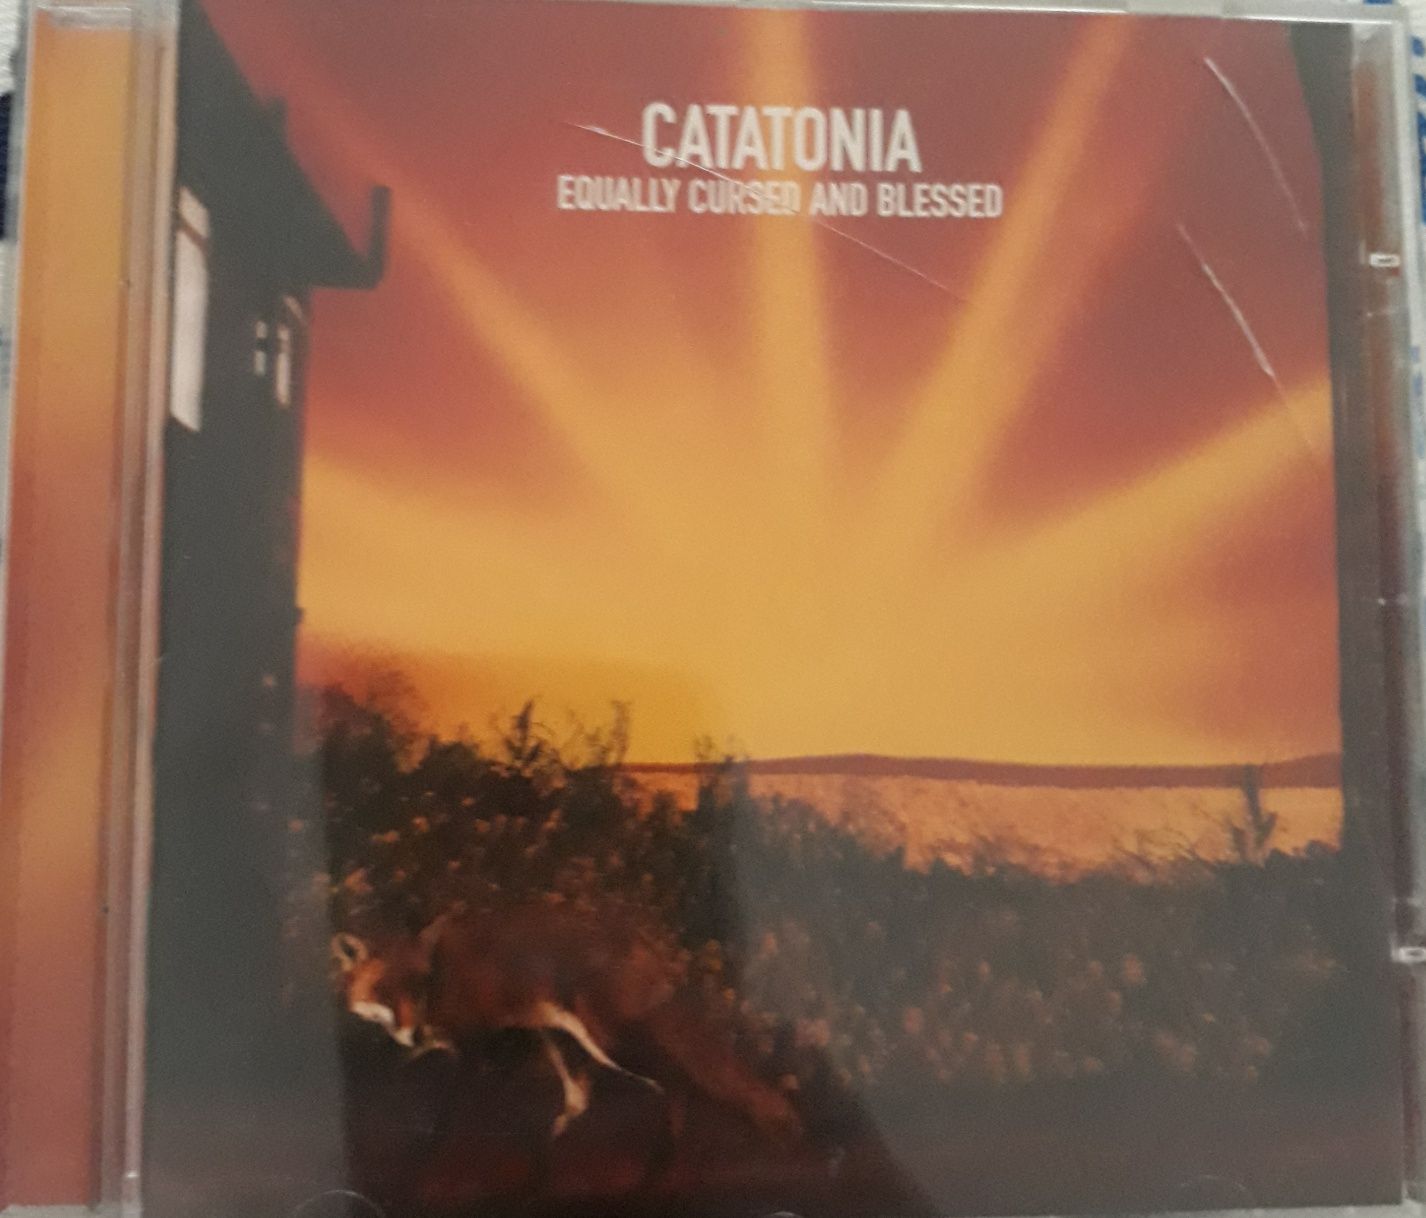 CD Catatonia - Equally Cursed And Blessed